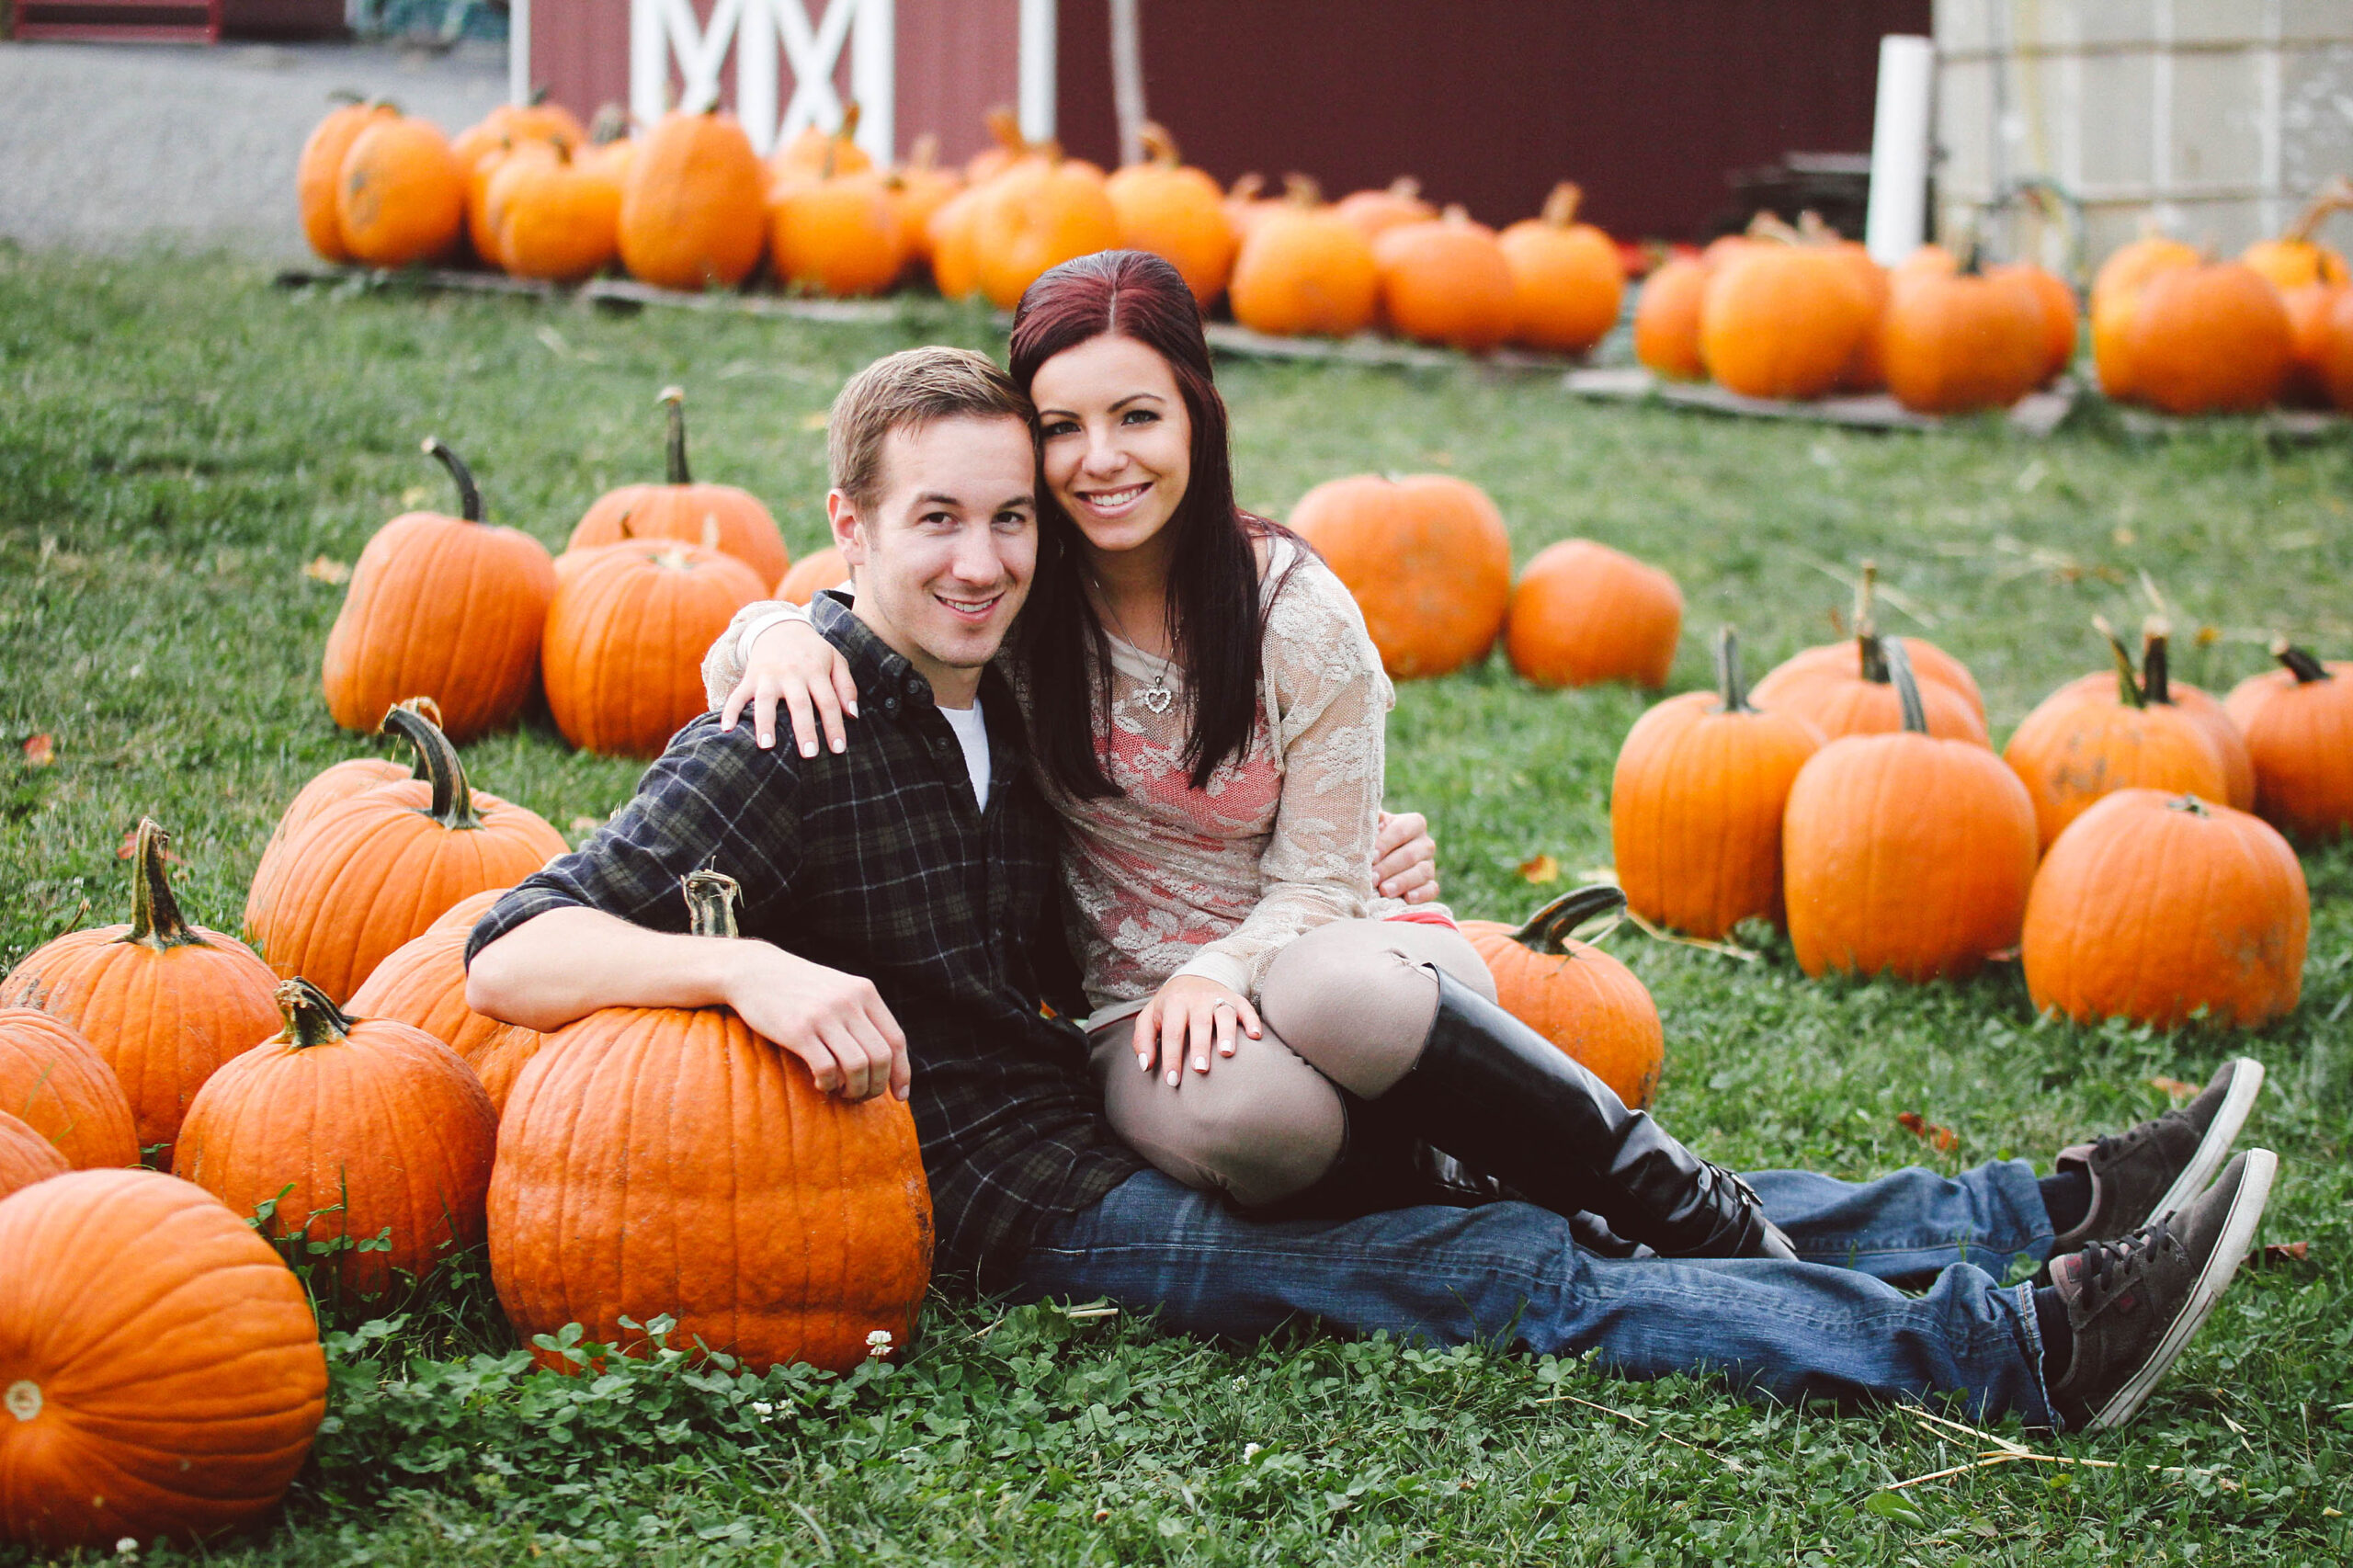 Professional photoshoot in pumpkin patch